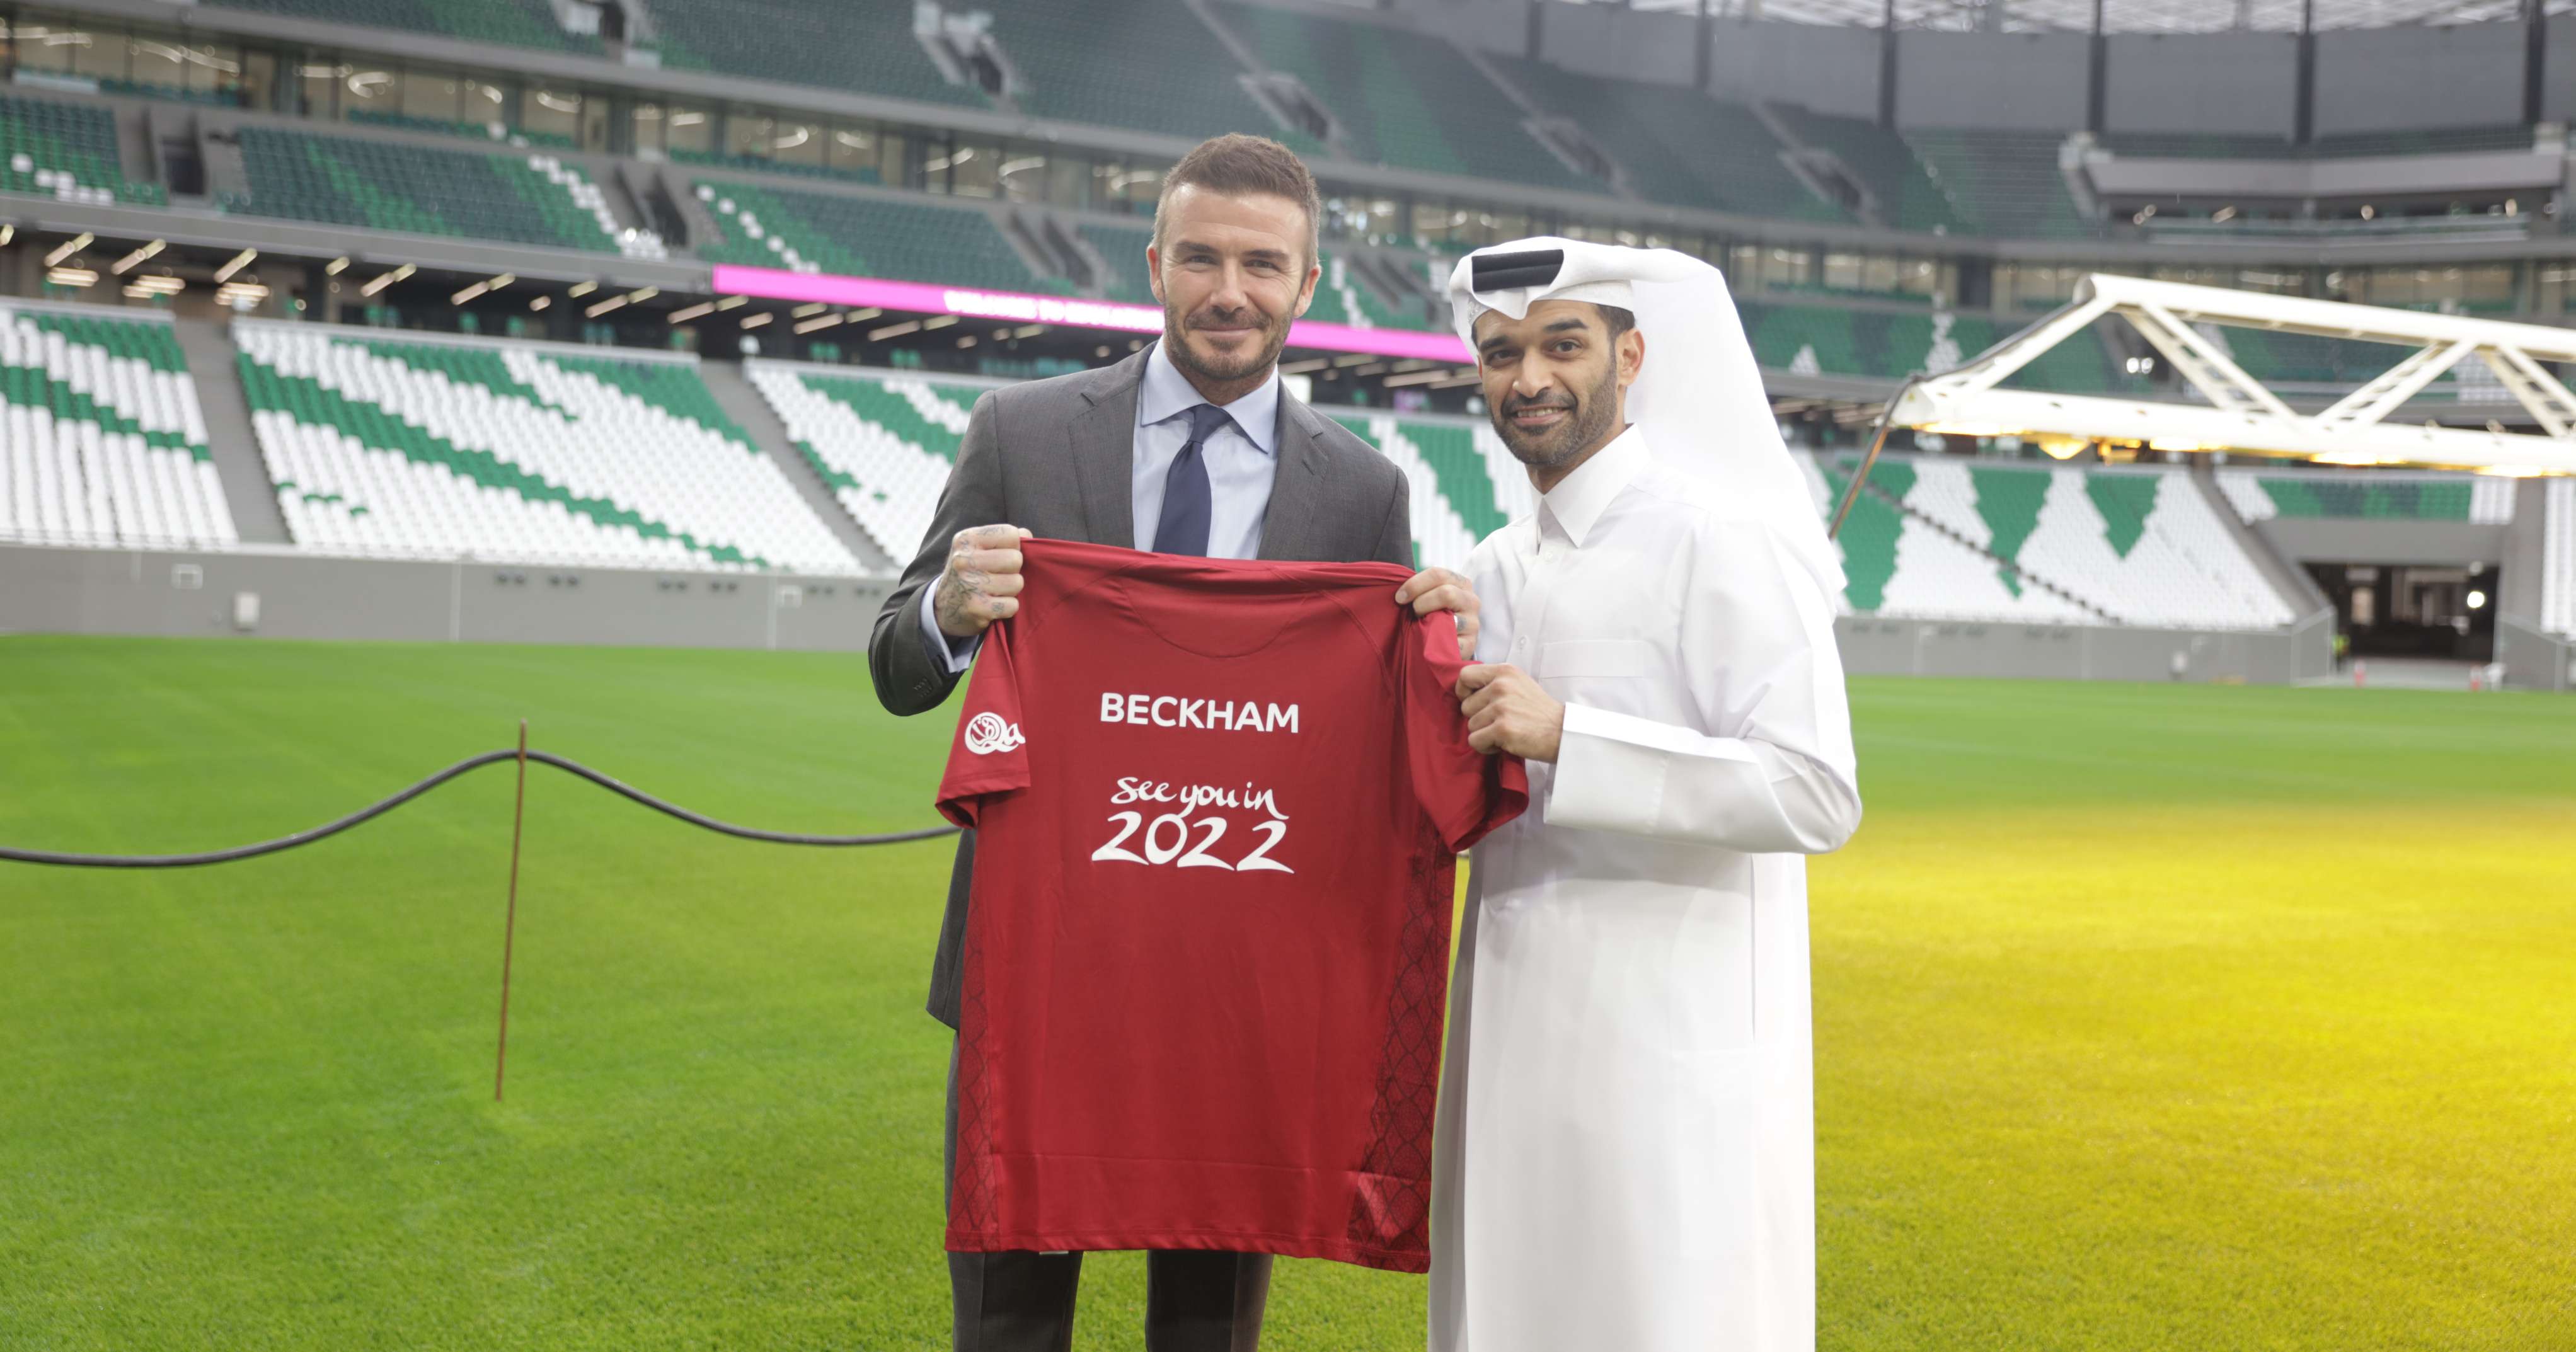 Beckham says Qatar 2022 is perfectly set up for England